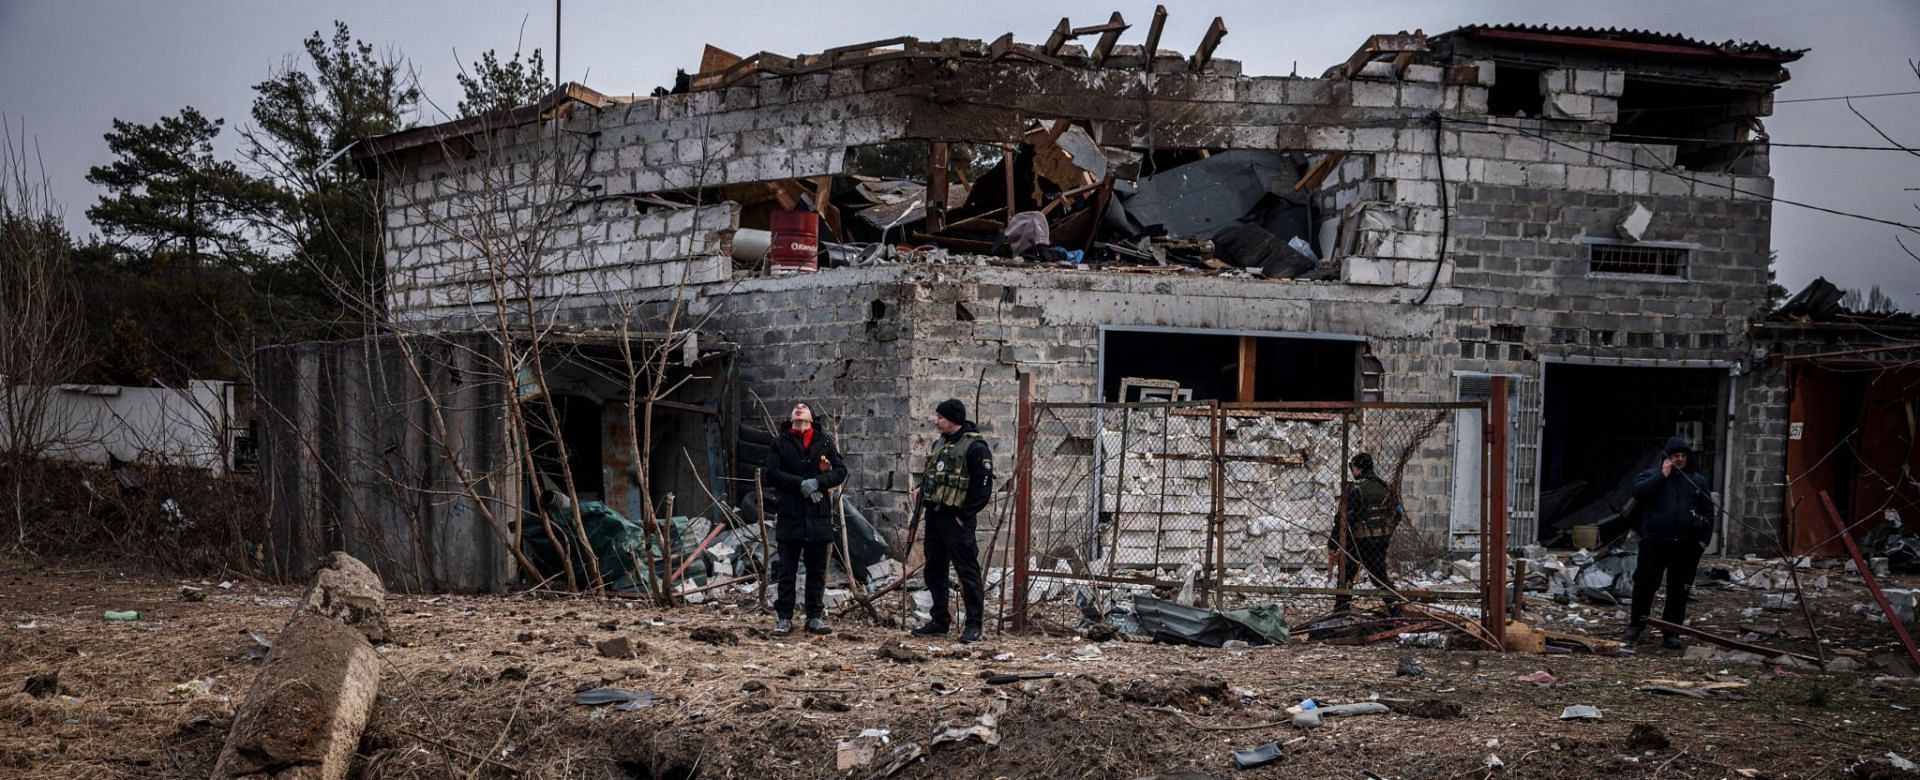 The town of Bucha faced an alleged massacre amid the Russia-Ukraine crisis (Image via Dimitar Dilkoff/Getty Images)